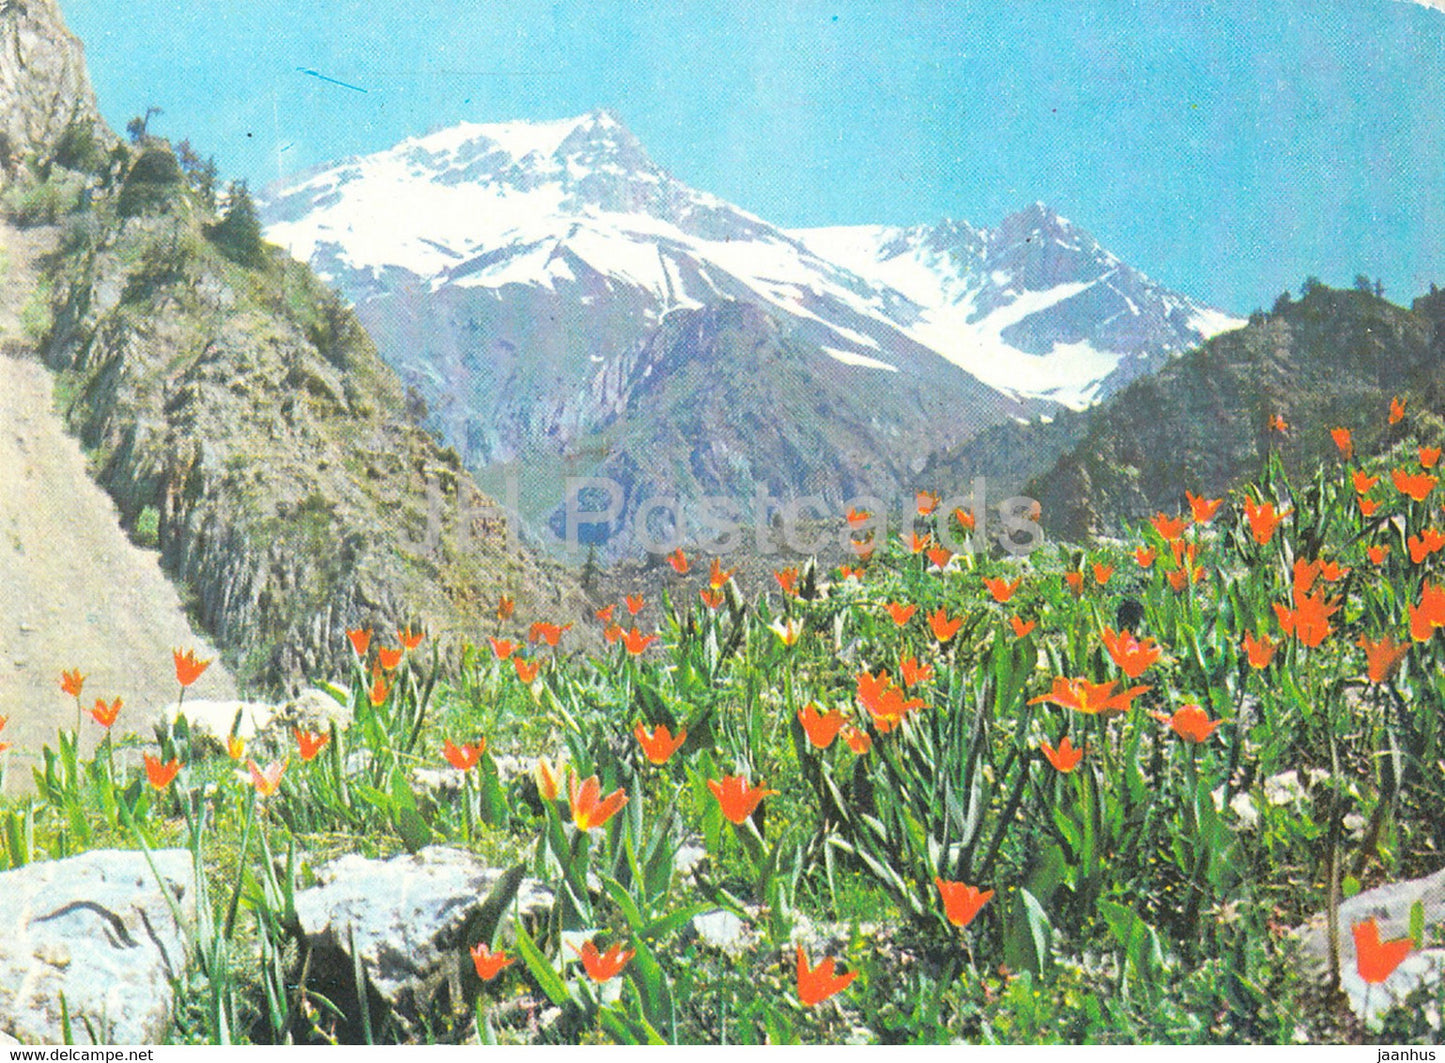 spring in the mountains - flowers - Nature Trails - 1981 - Uzbekistan USSR - unused - JH Postcards